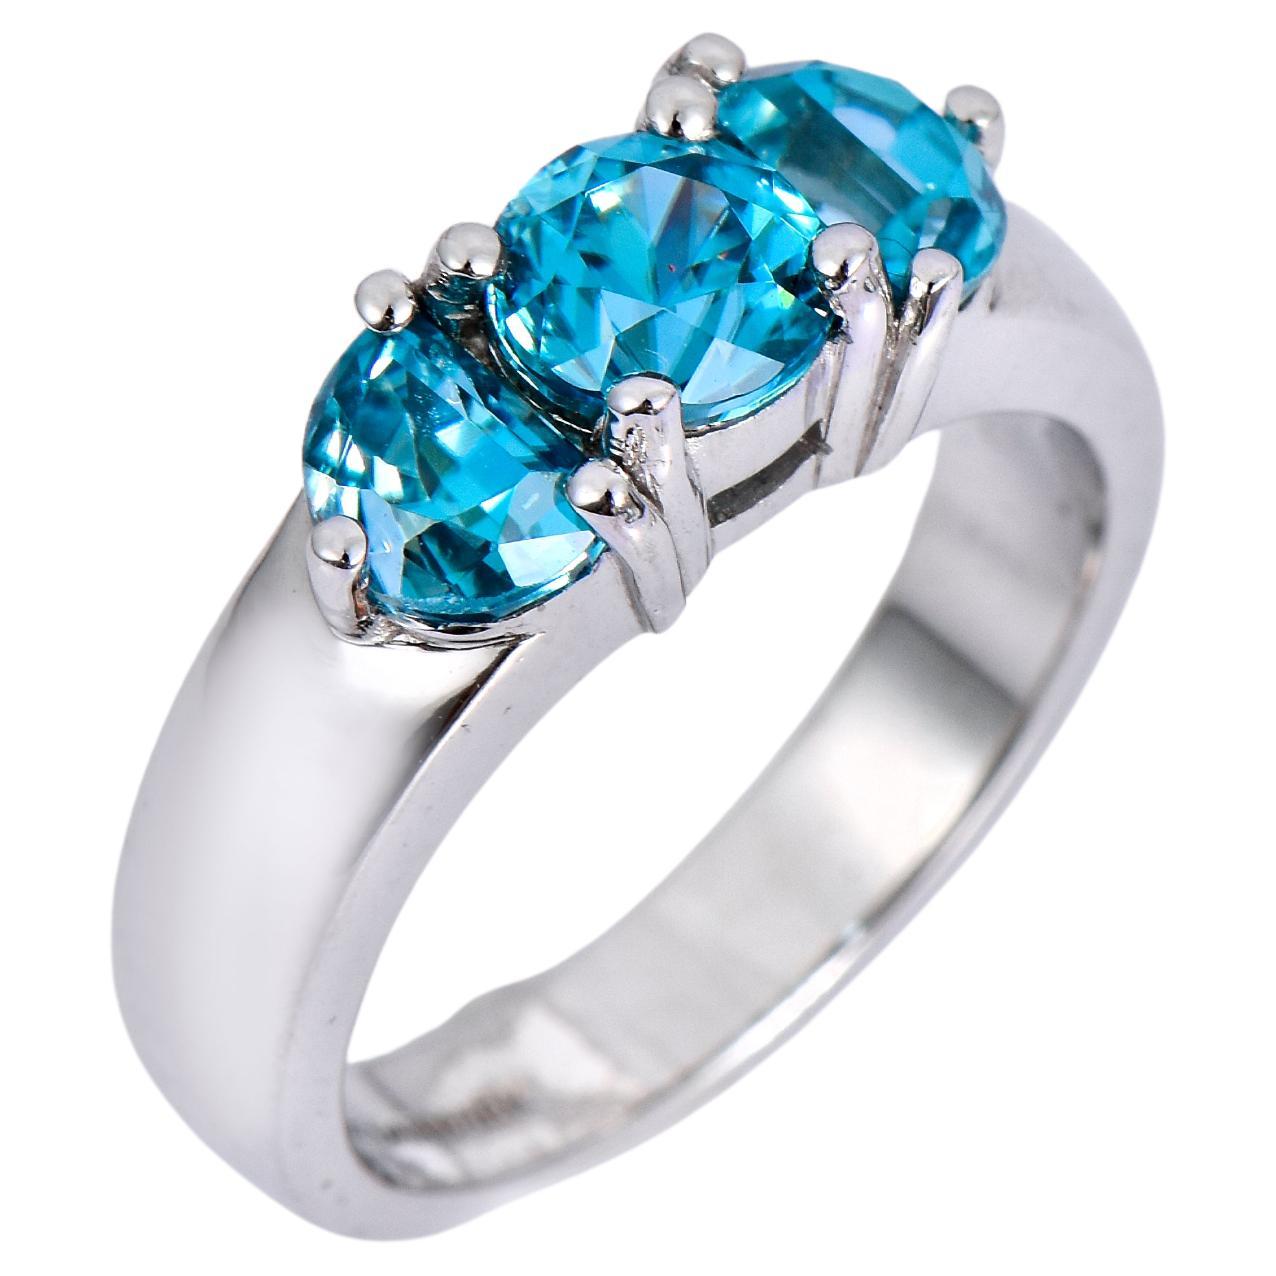 Orloff of Denmark, 3.41 ct Natural Blue Zircon Ring in 925 Sterling Silver For Sale